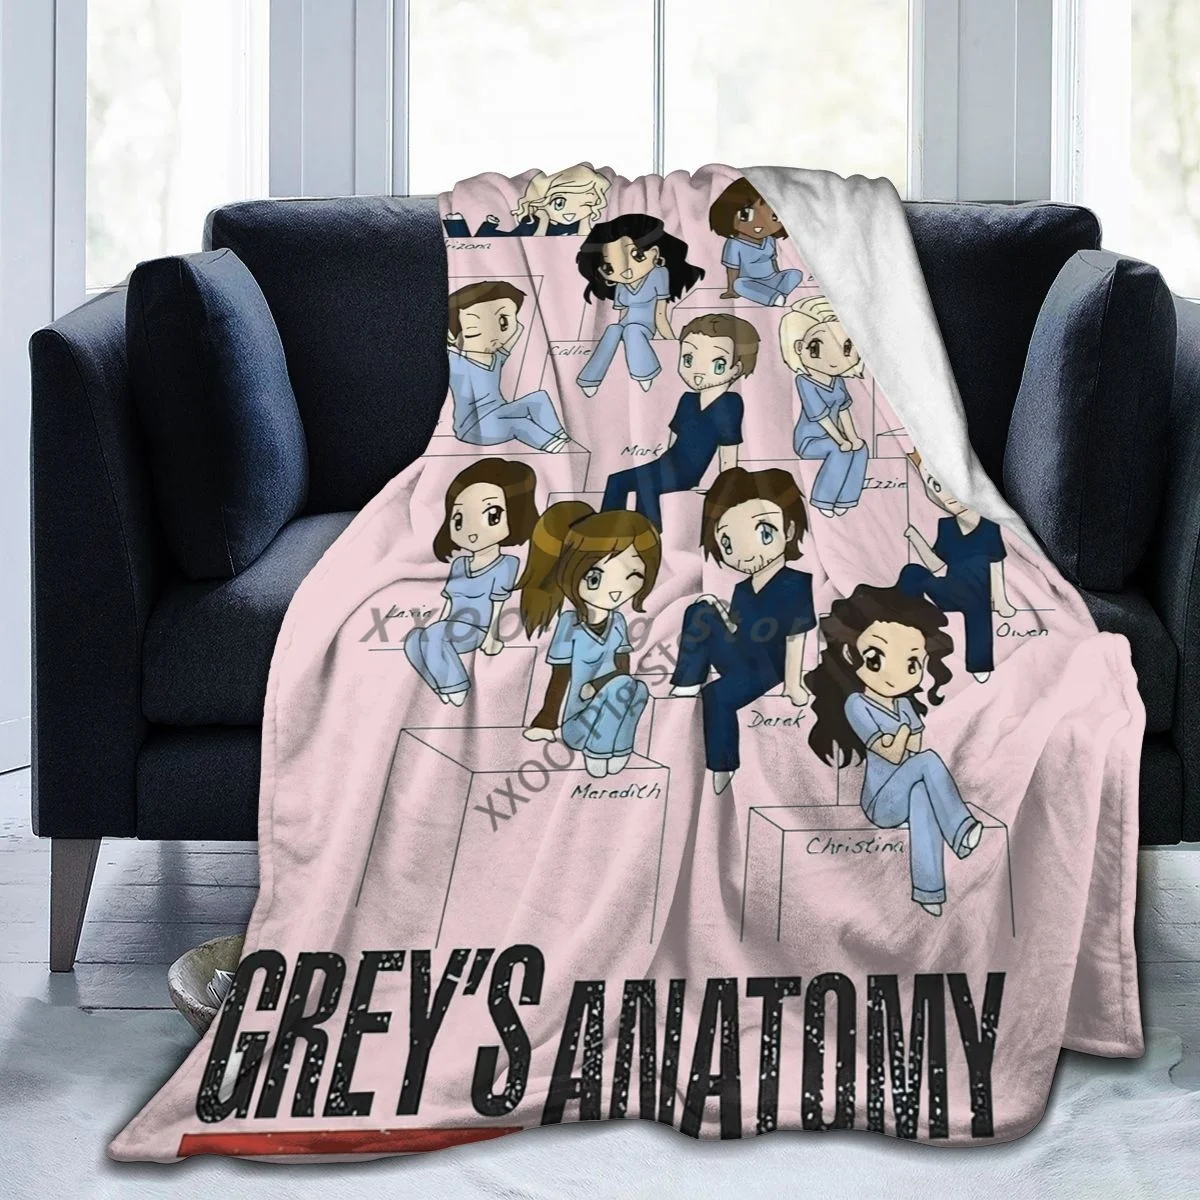 

Grey's Anatomy Super Soft Fleece Throw Blankets Durable Home Decor 3D Fashion Print Perfect for Couch Bed Sofa All Season